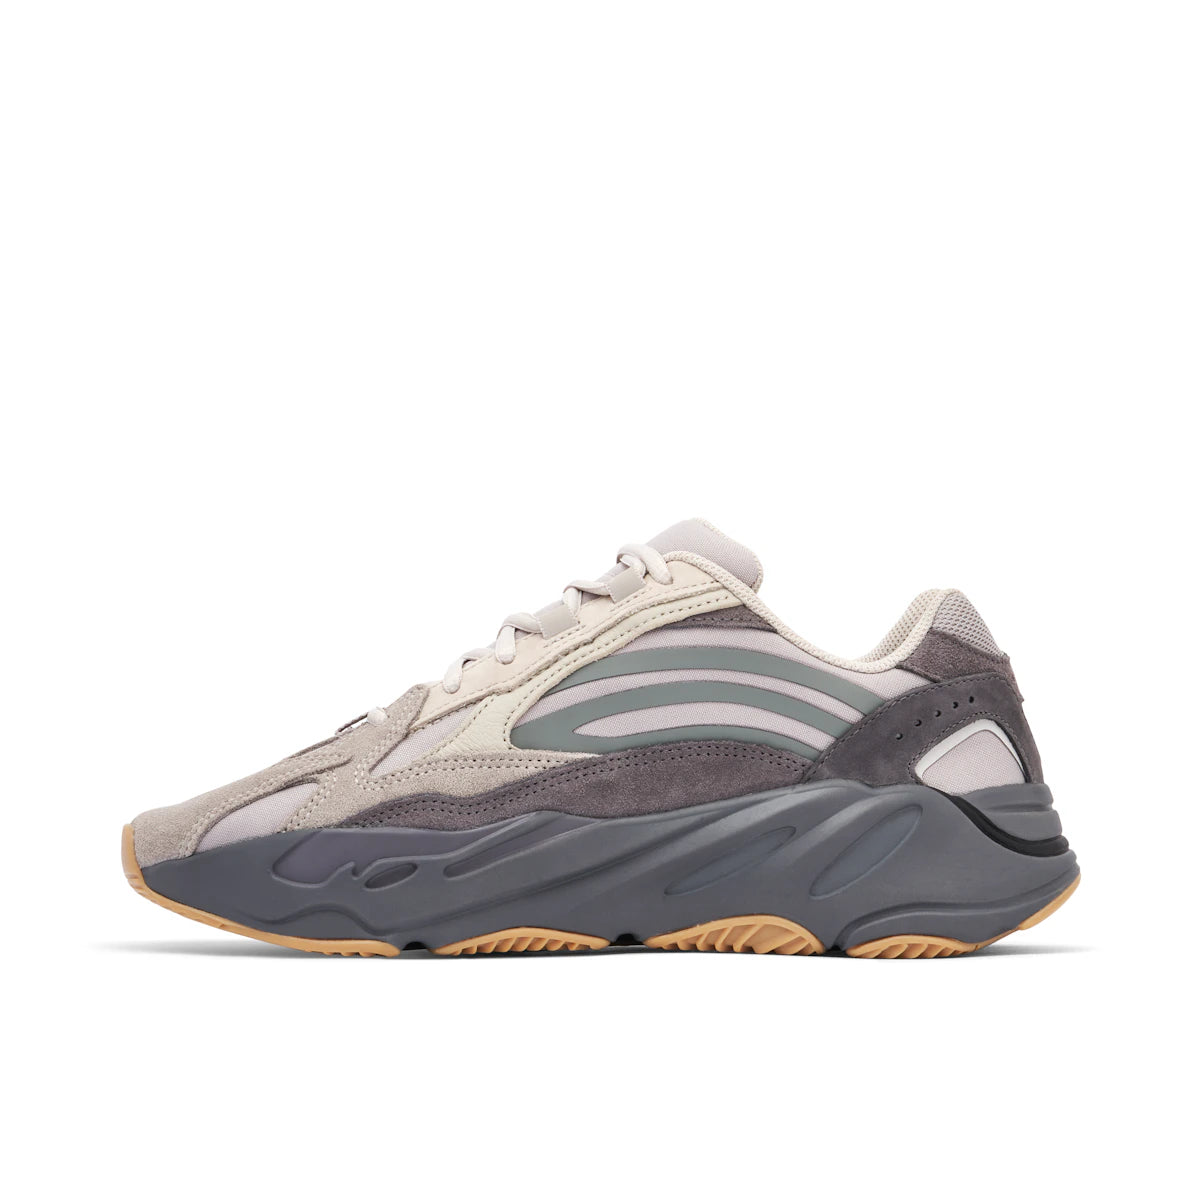 Adidas Yeezy Boost 700 V2 Tephra by Yeezy from £270.99